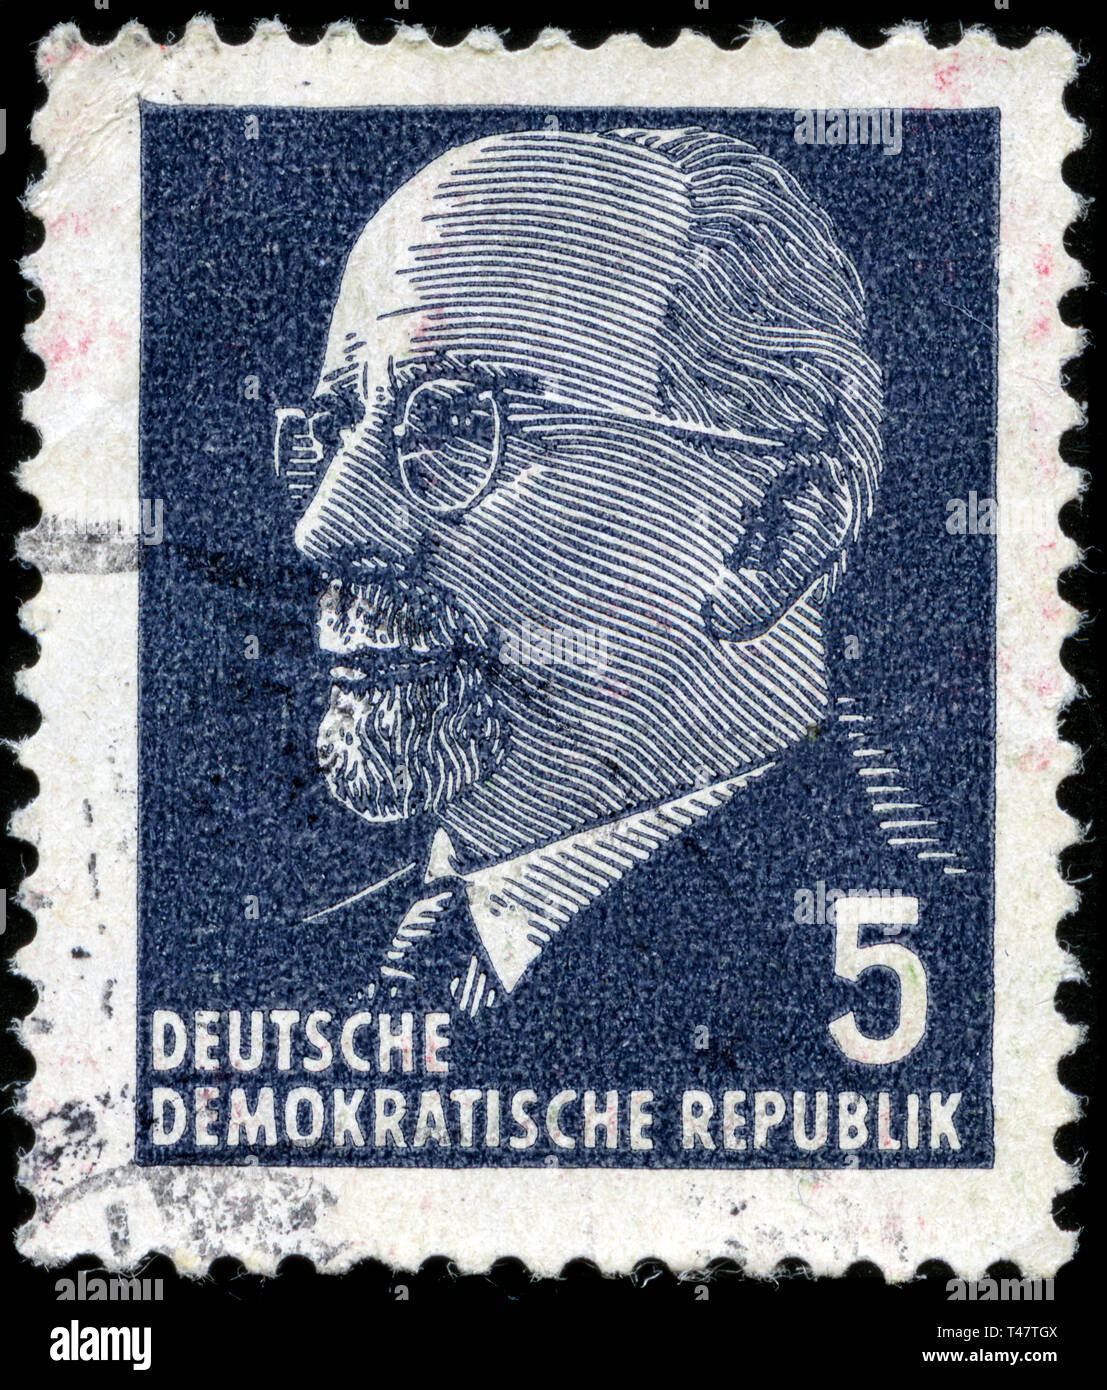 Postage stamp from East Germany (DDR) in the Chairman of the State Council  Walter Ulbricht series issued in 1962 Stock Photo - Alamy